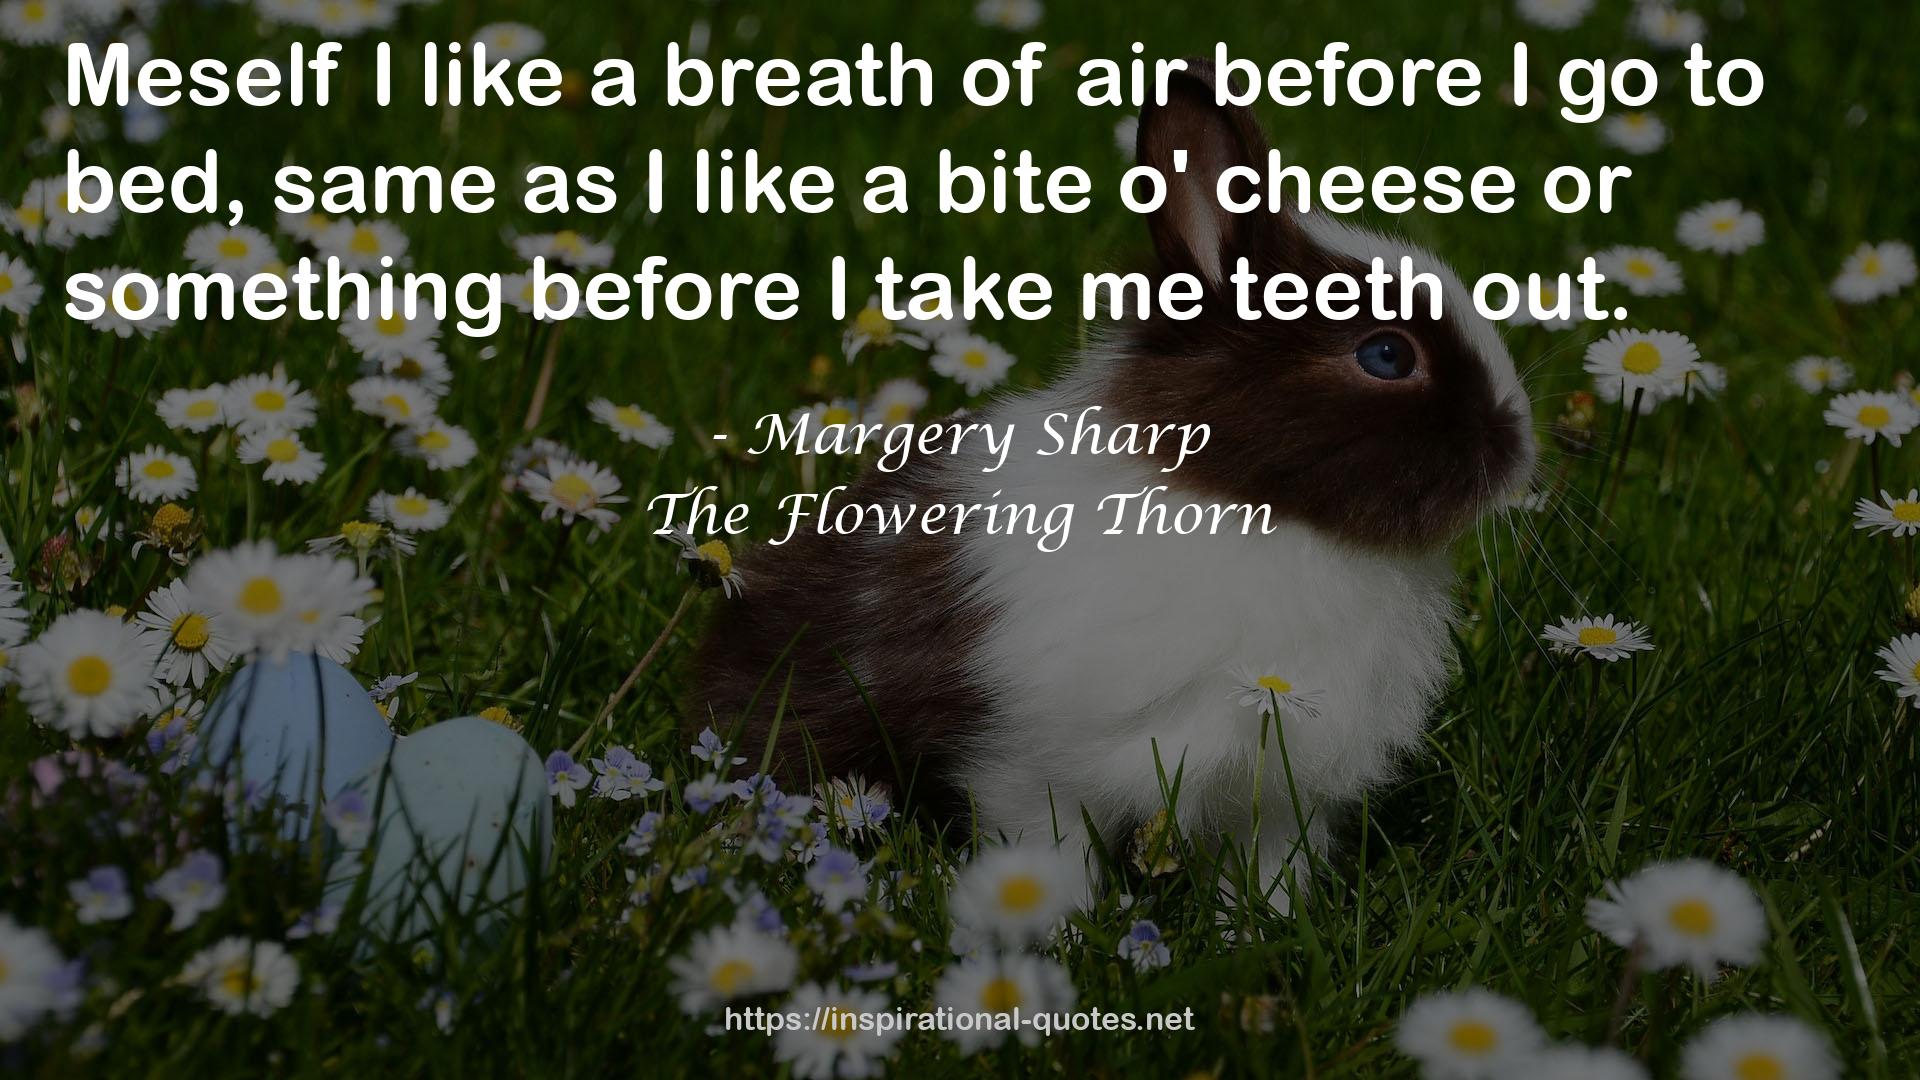 The Flowering Thorn QUOTES